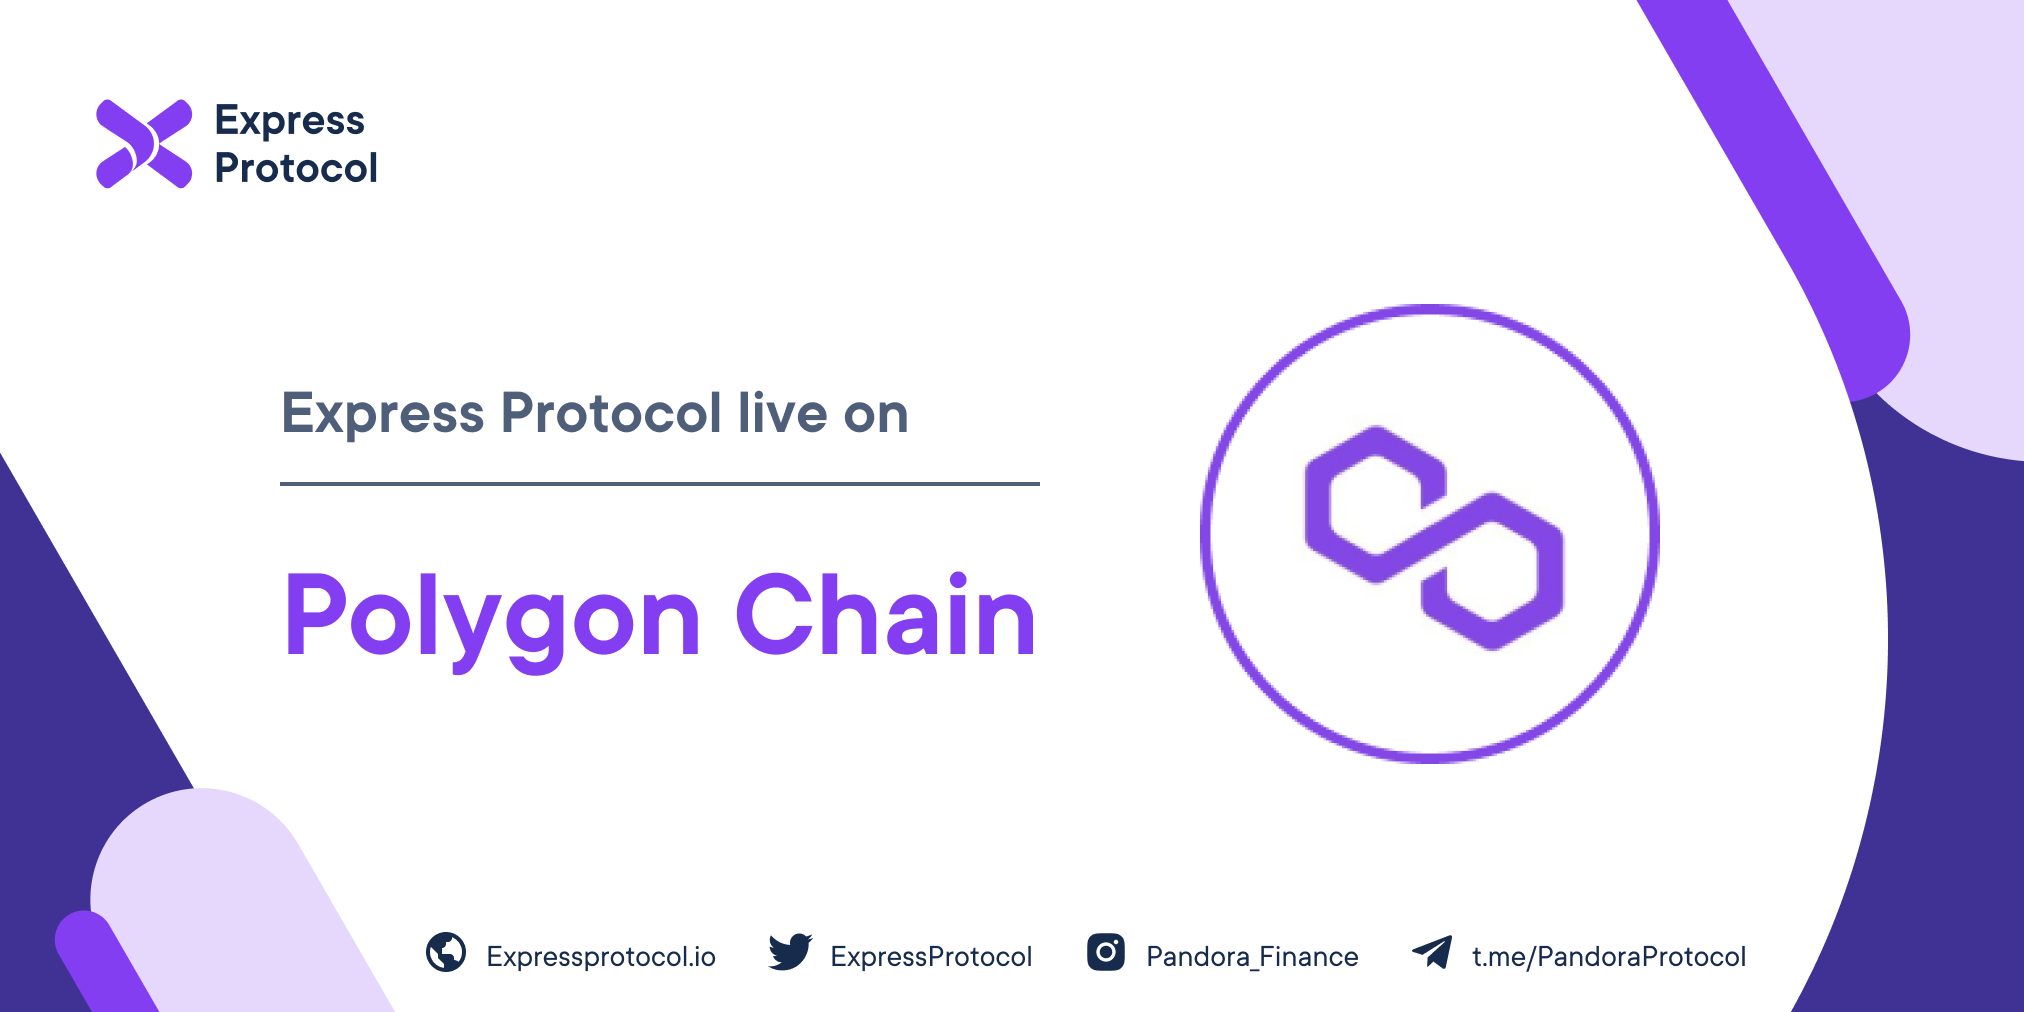 Express Protocol is now also on Polygon